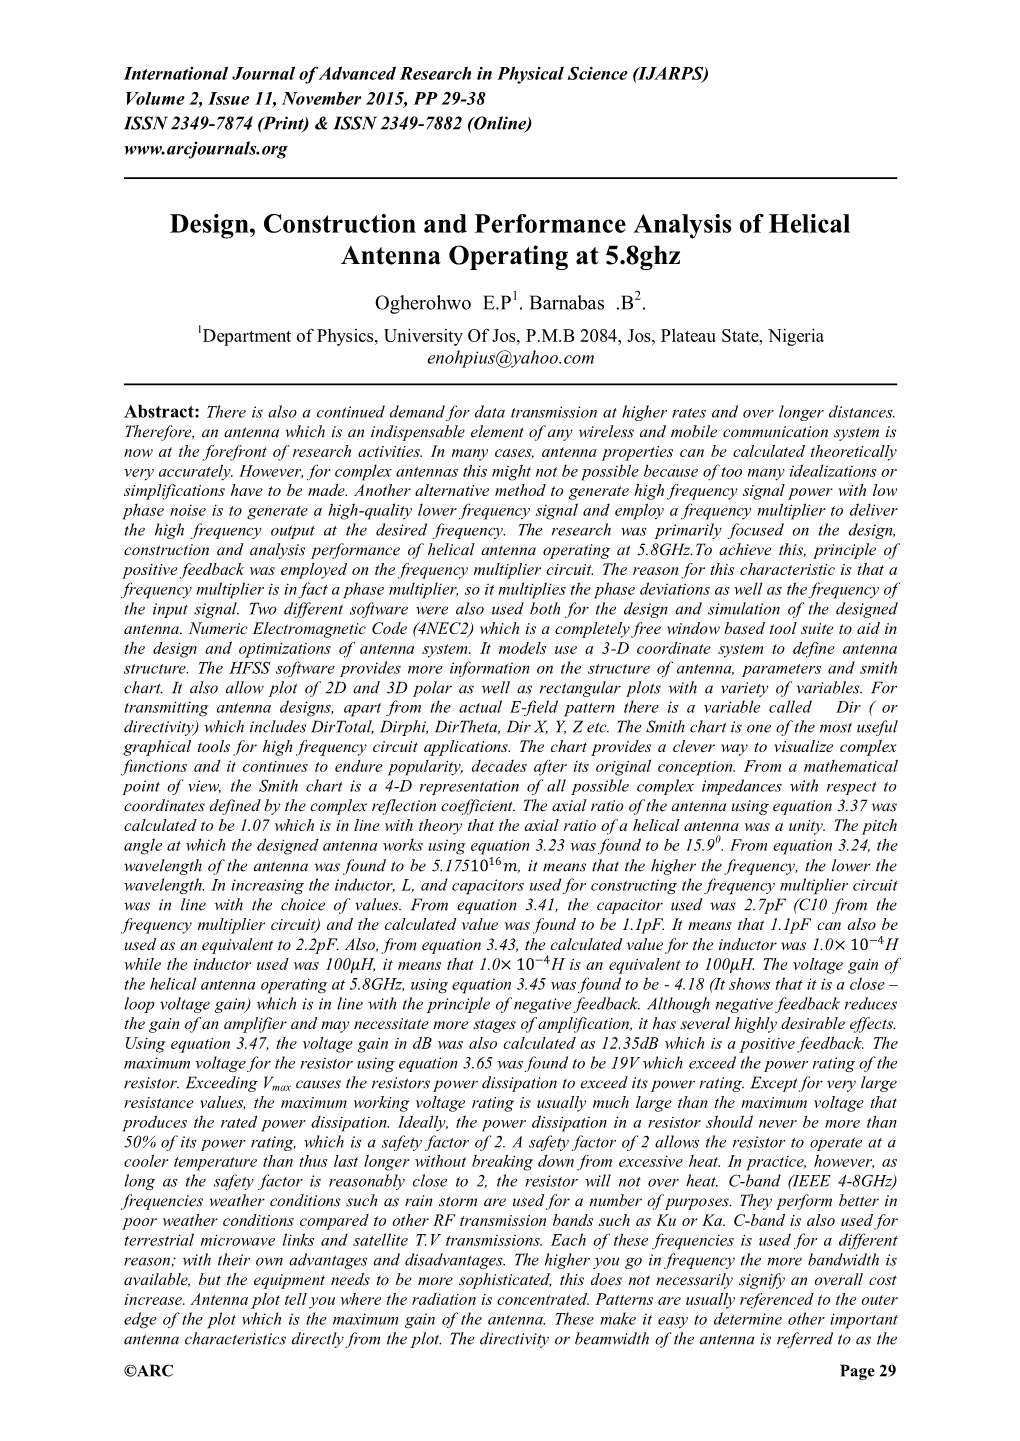 Design, Construction and Performance Analysis of Helical Antenna Operating at 5.8Ghz